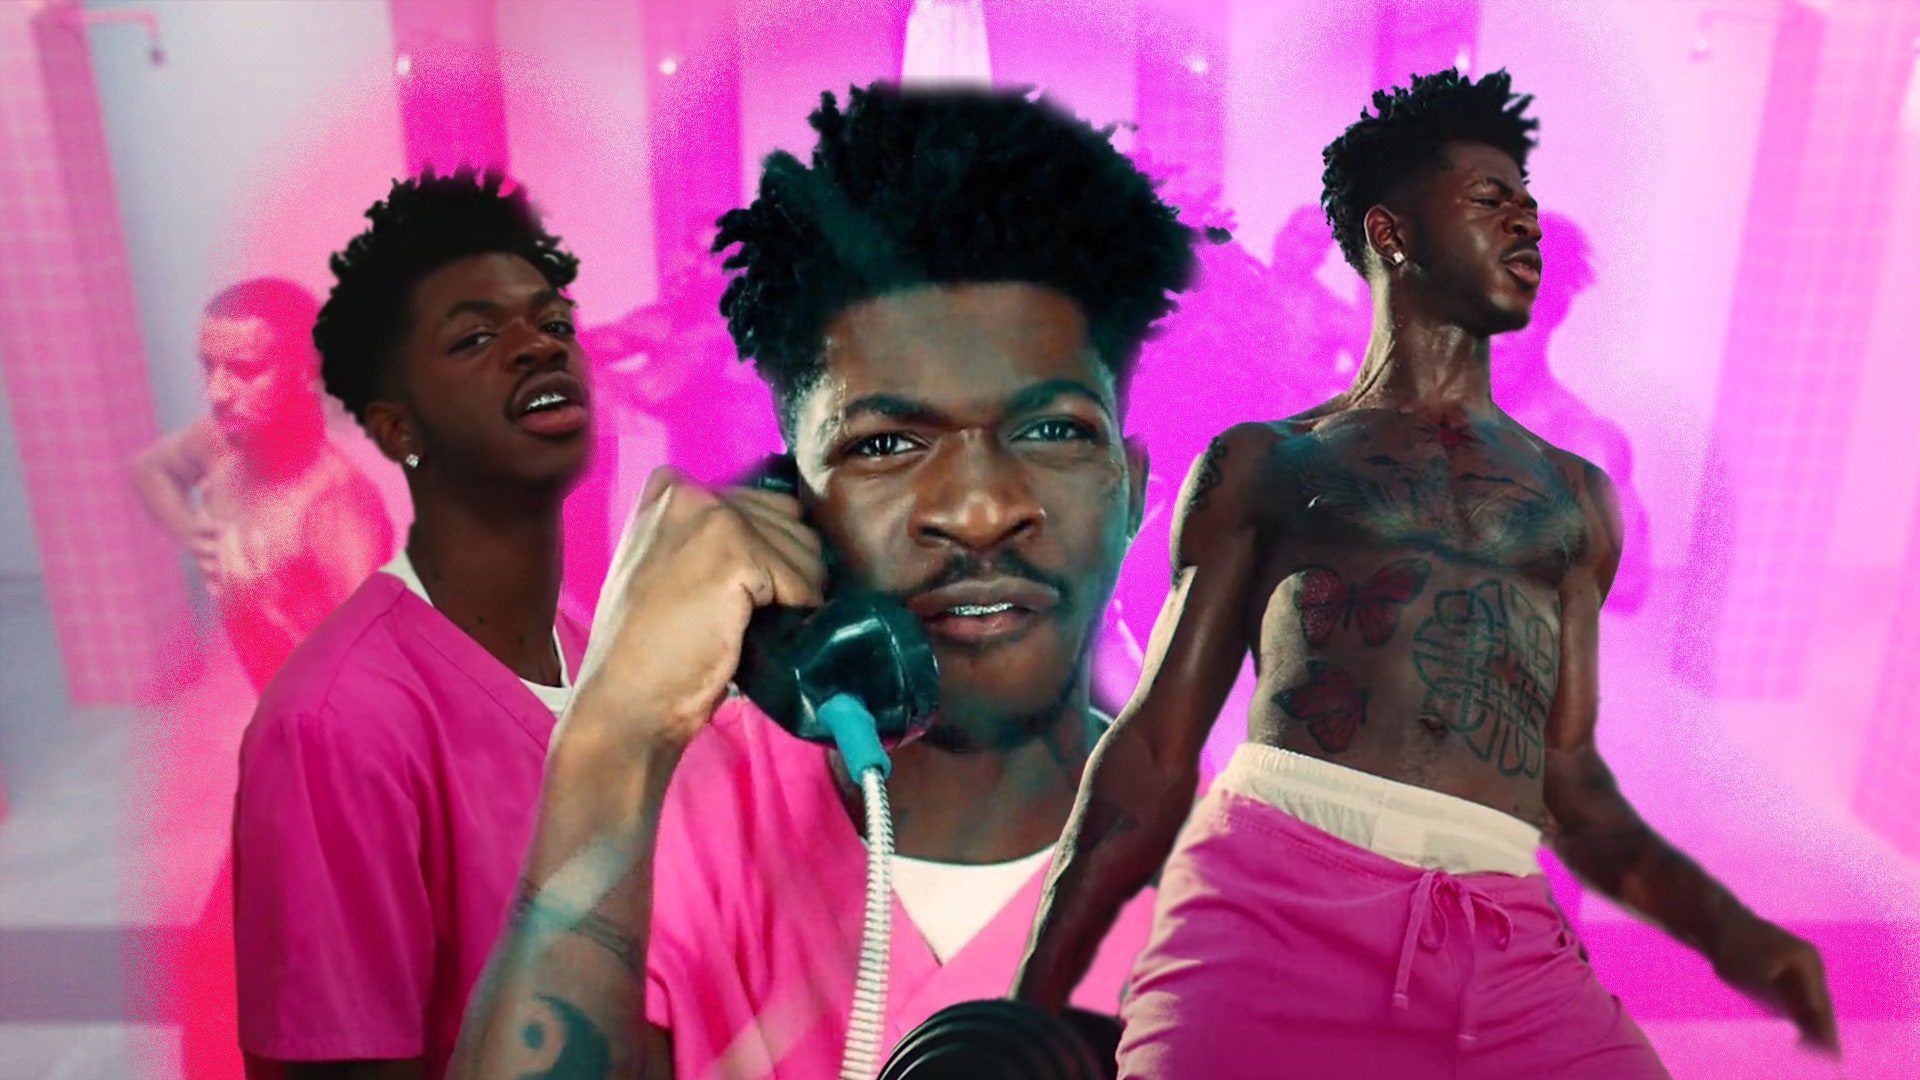 Lil Nas X has anointed 'Industry Baby Pink' the official hue of our hot boy summer